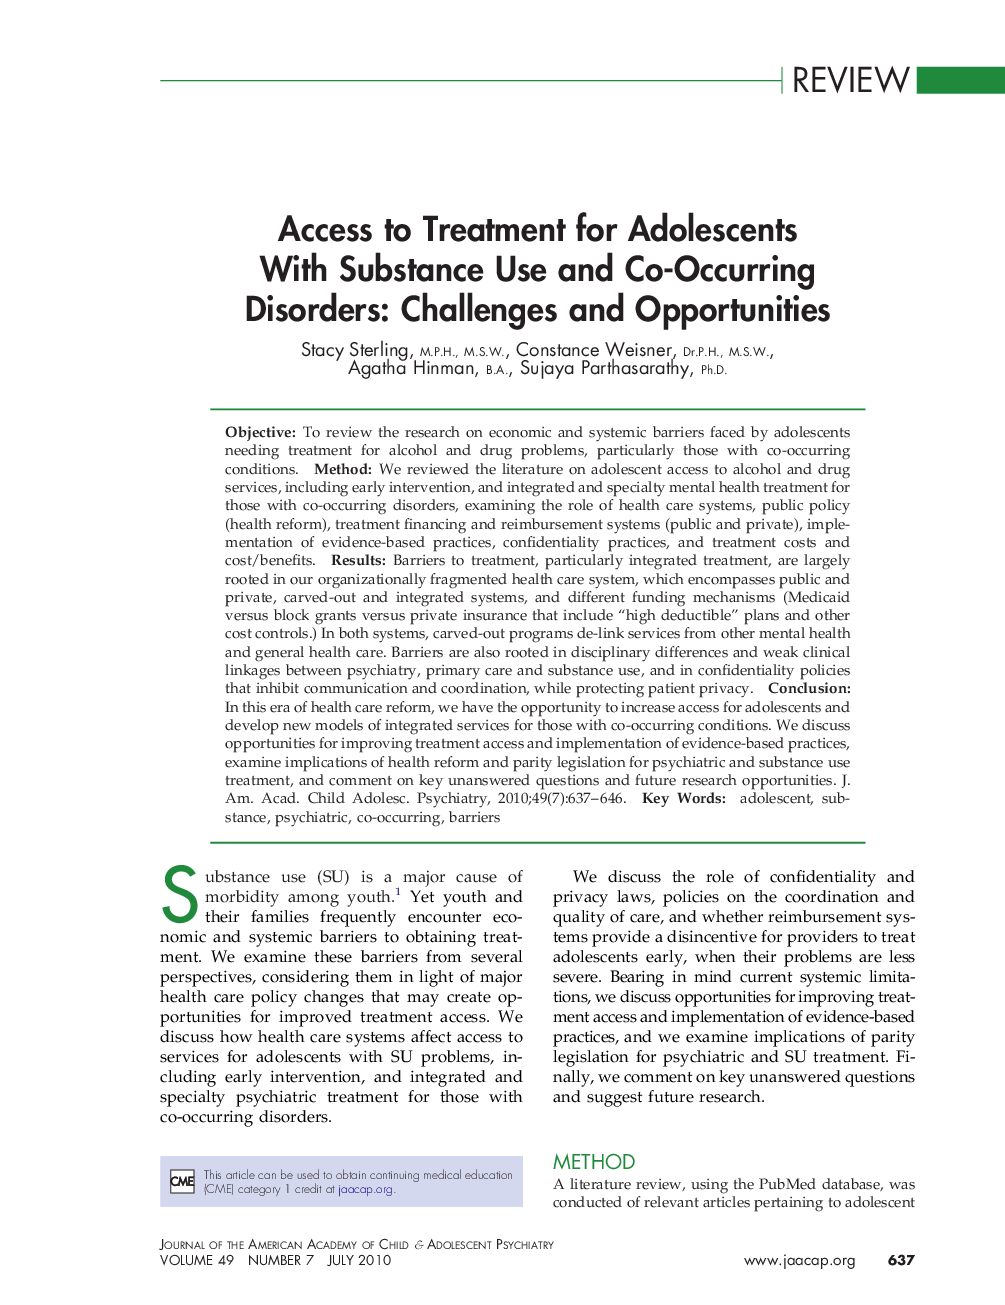 Access to Treatment for Adolescents With Substance Use and Co-Occurring Disorders: Challenges and Opportunities 